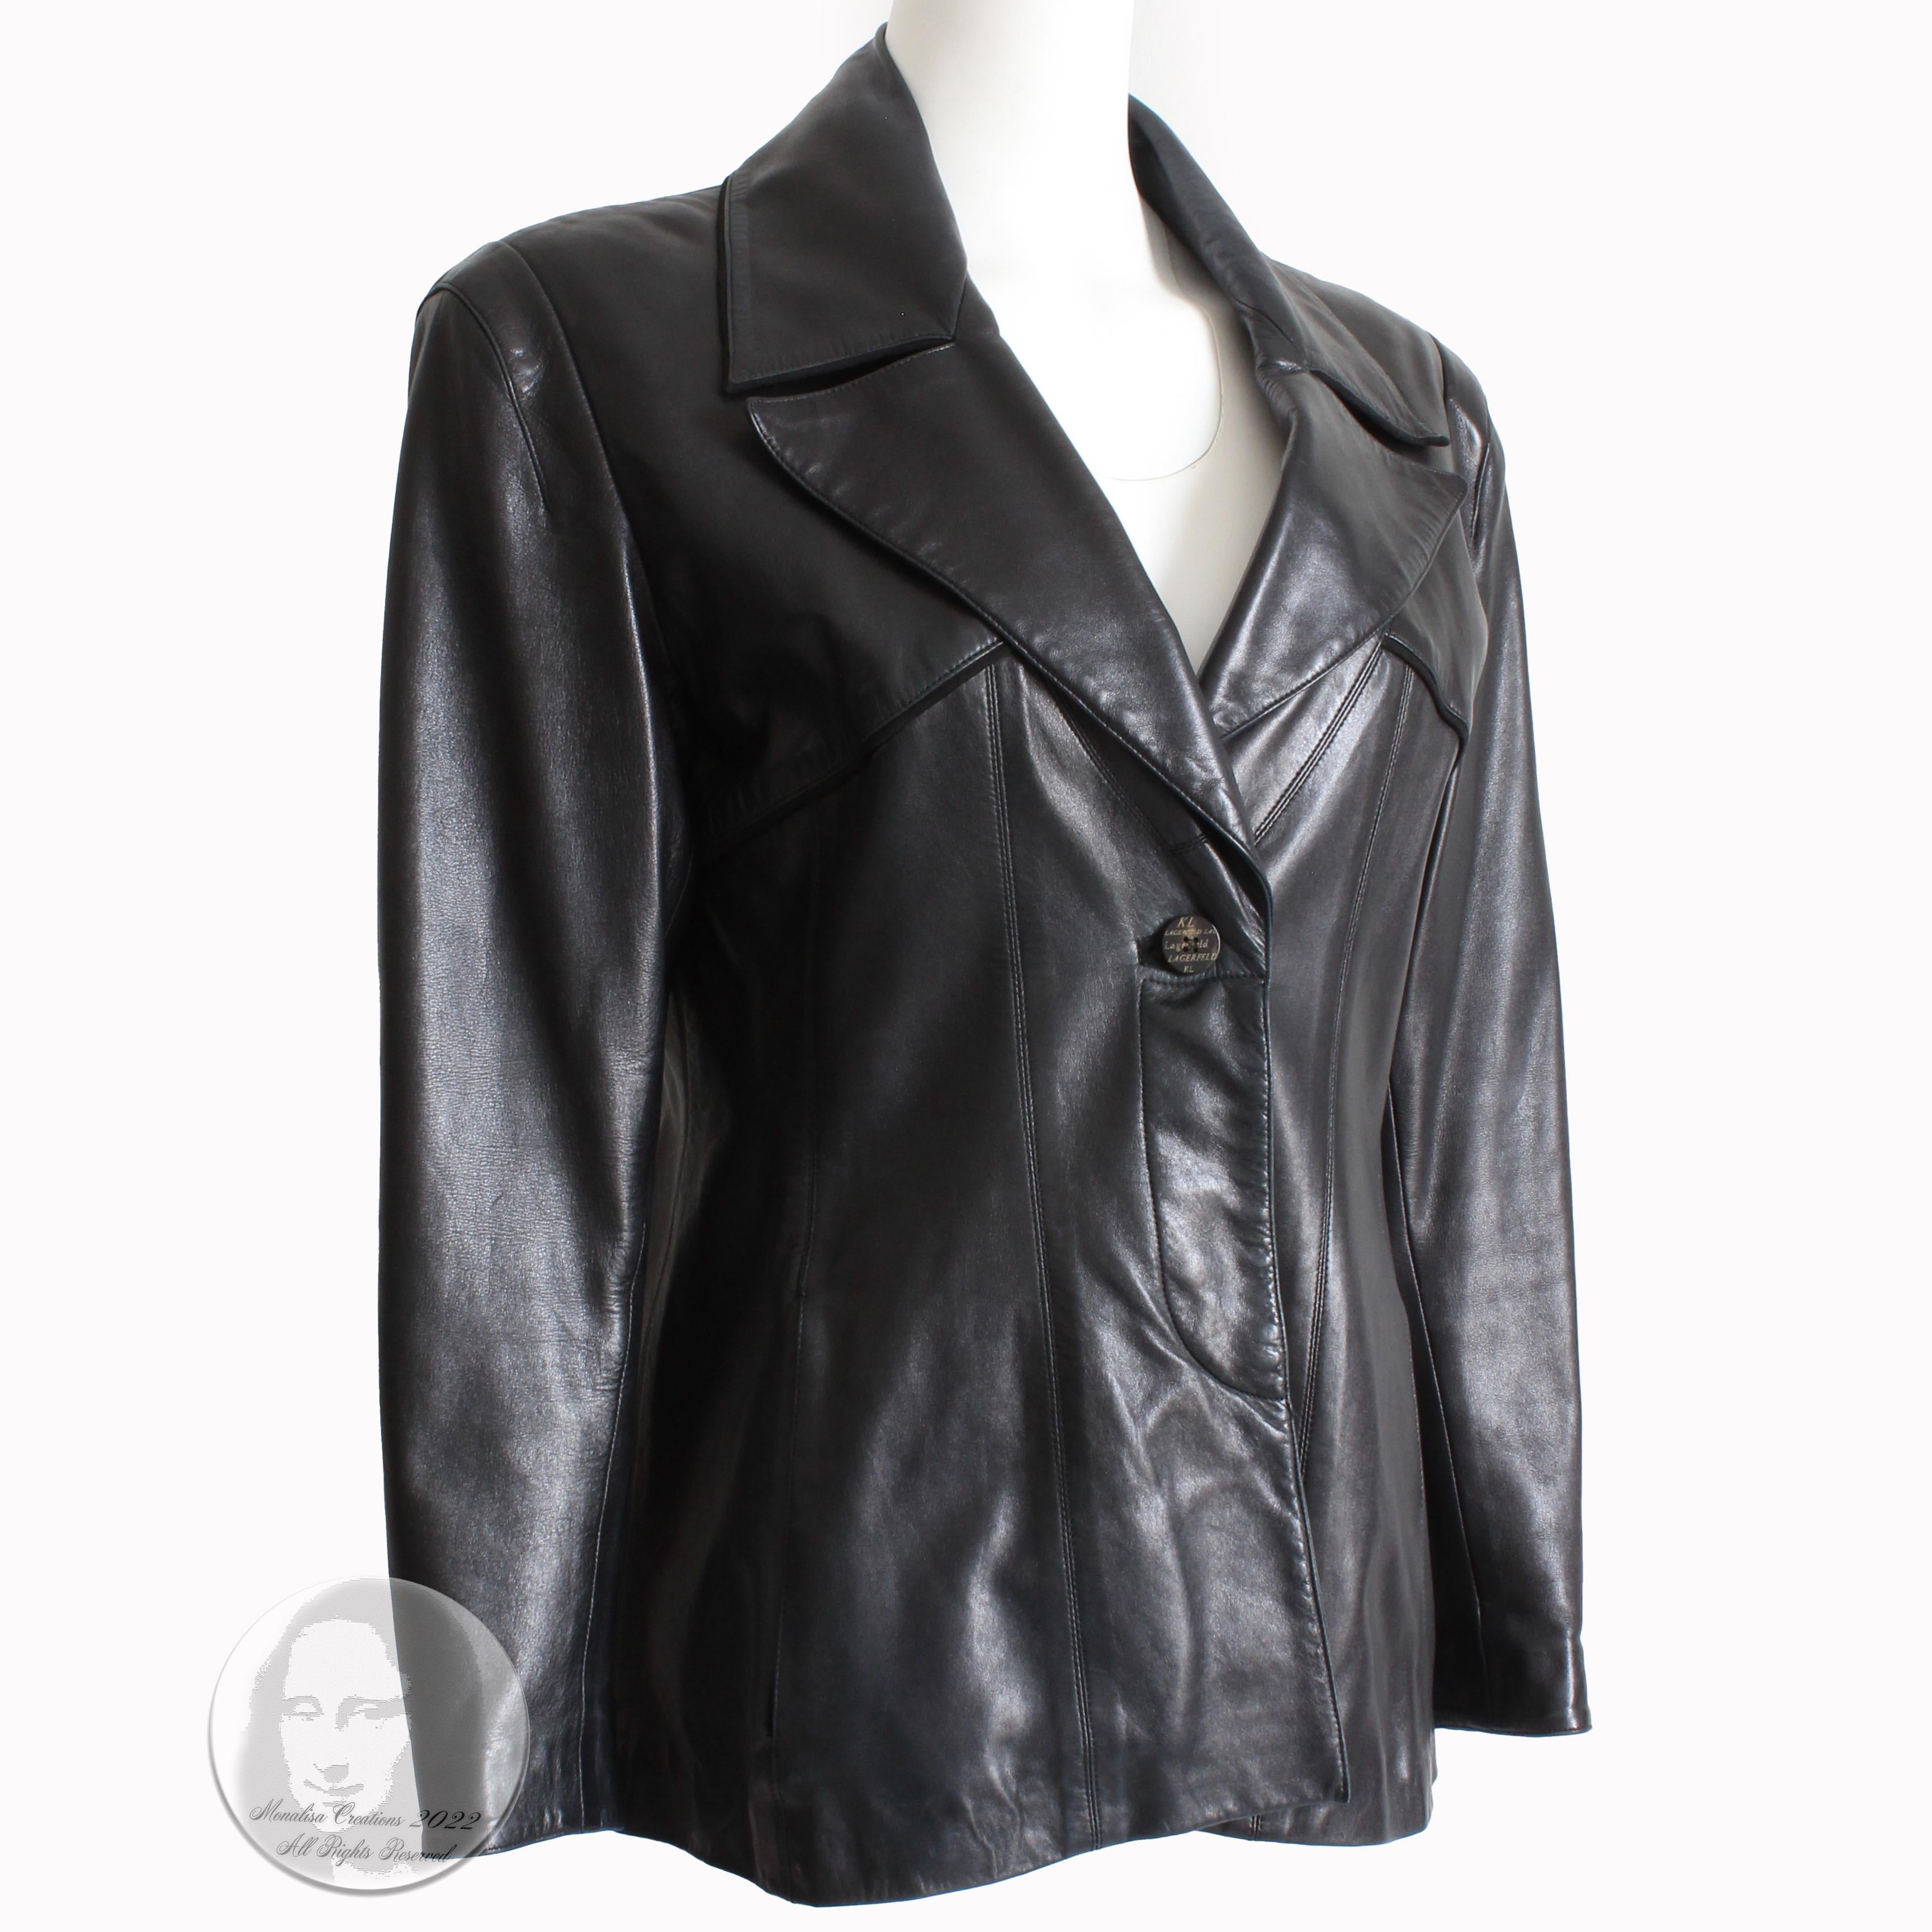 This incredibly supple black lambskin jacket was designed by Karl Lagerfeld and sold by Fred Hayman Beverly Hills, most likely in the 1990s.  Fred Hayman, also known as the 'Godfather of Rodeo Drive' was took over the original Giorgio Beverly Hills